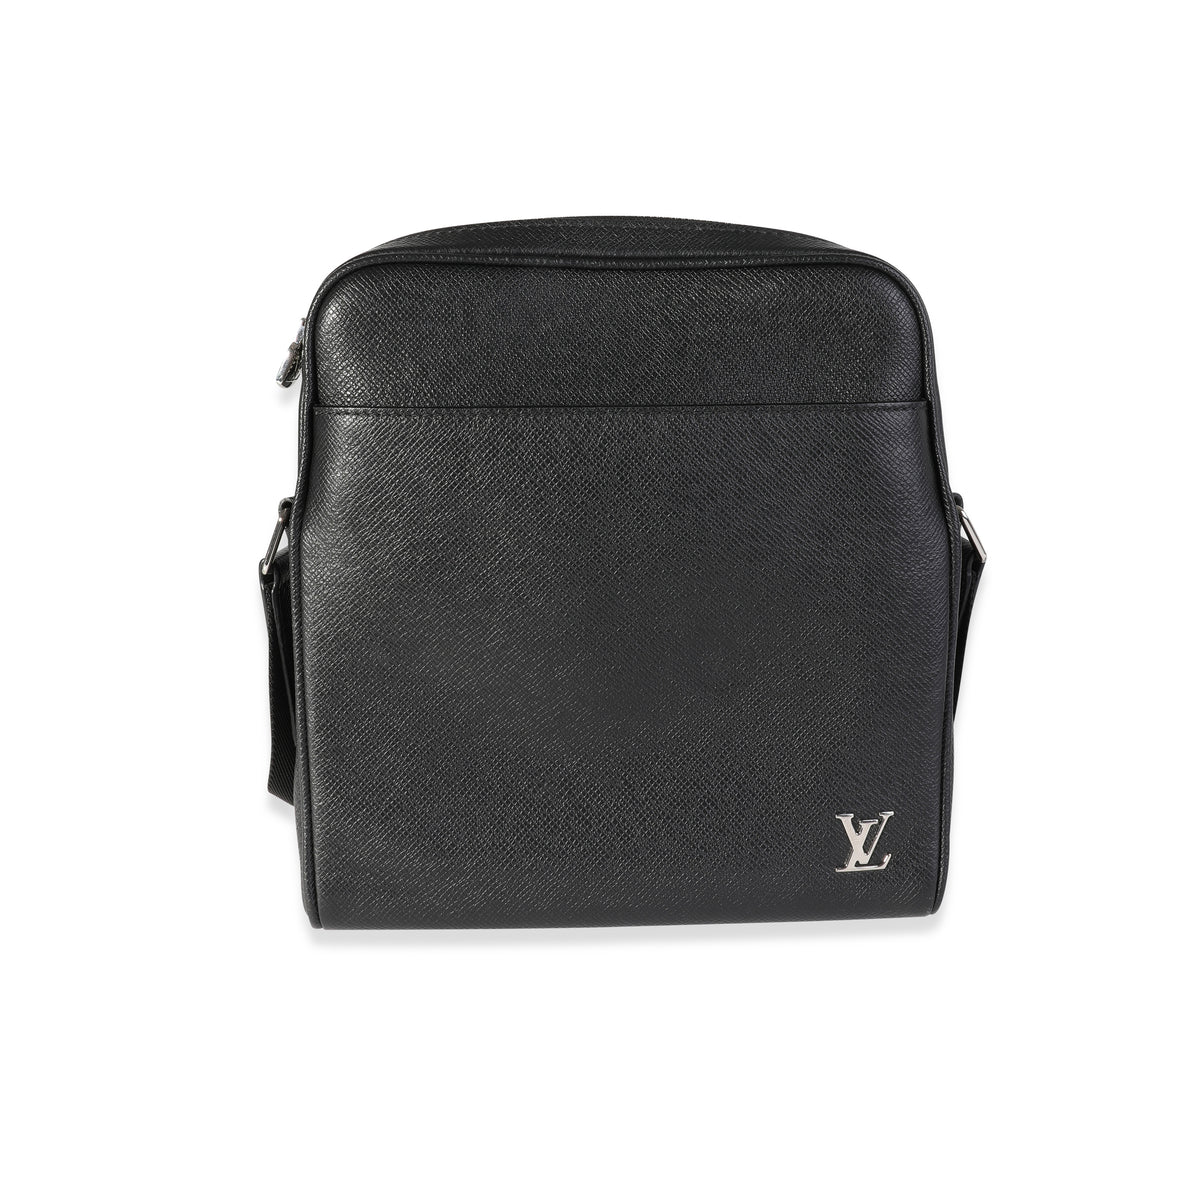 Louis Vuitton Alex Backpack Taiga Cowhide Leather with Silver